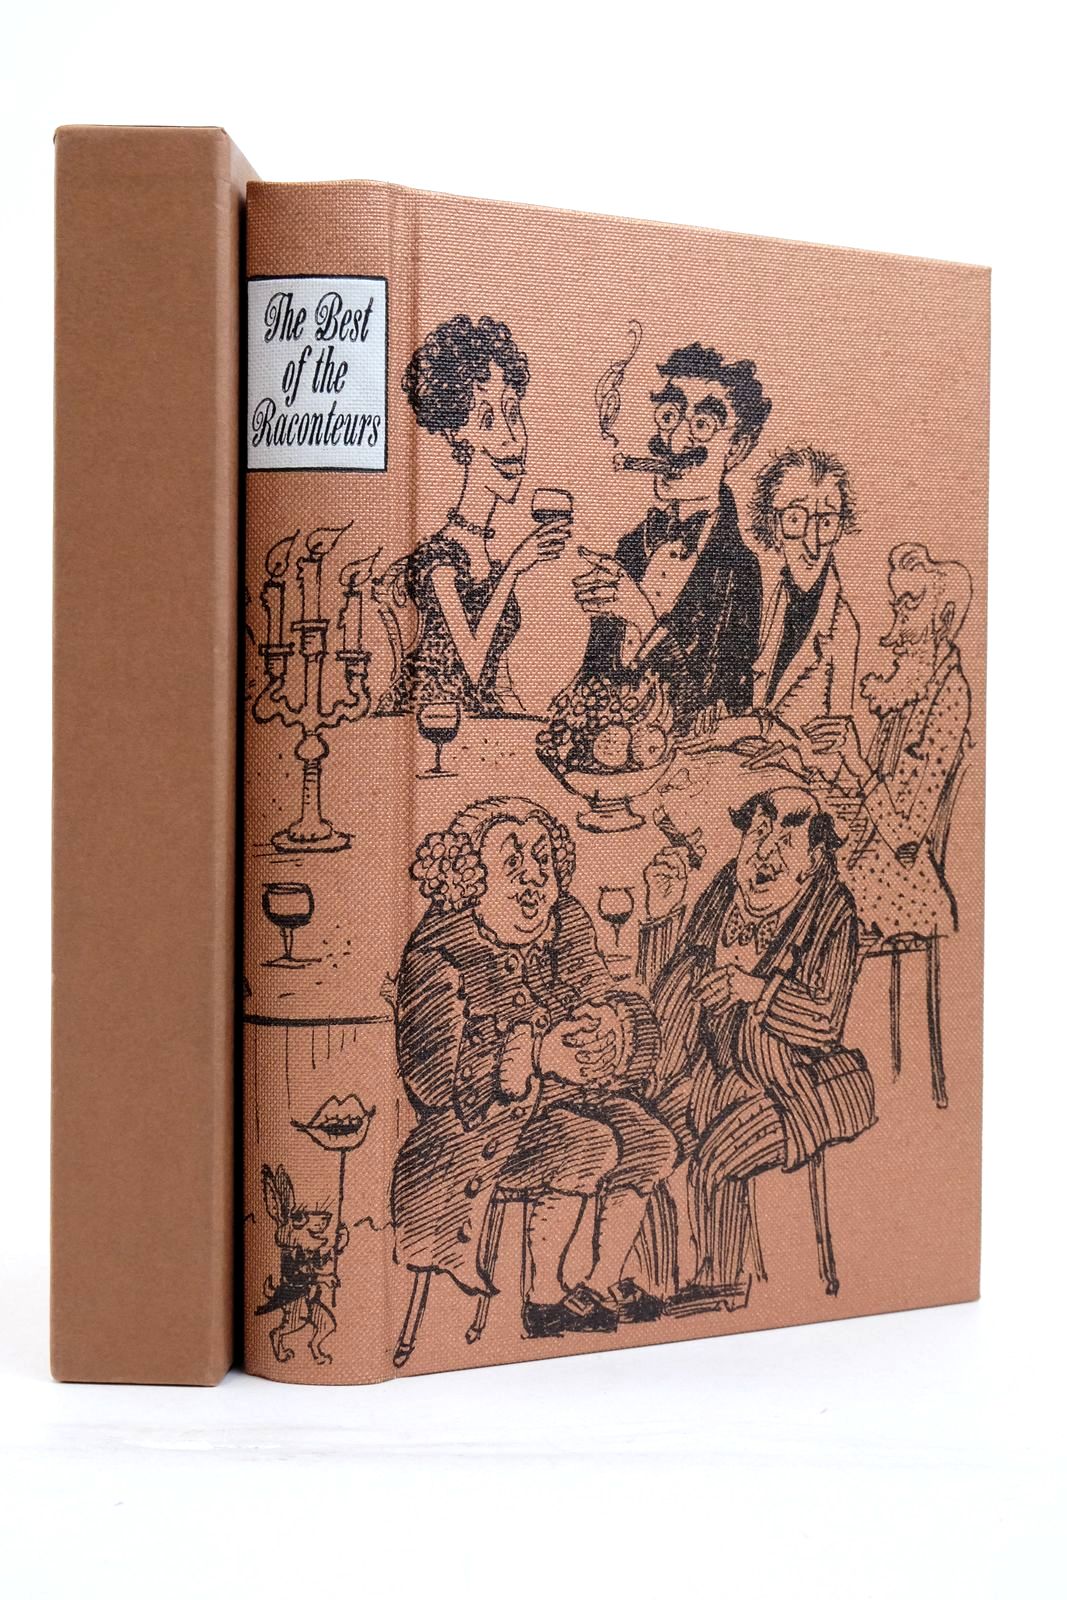 Photo of THE BEST OF THE RACONTEURS written by Morley, Sheridan Heald, Tim illustrated by Lawrence, John published by Folio Society (STOCK CODE: 2137821)  for sale by Stella & Rose's Books